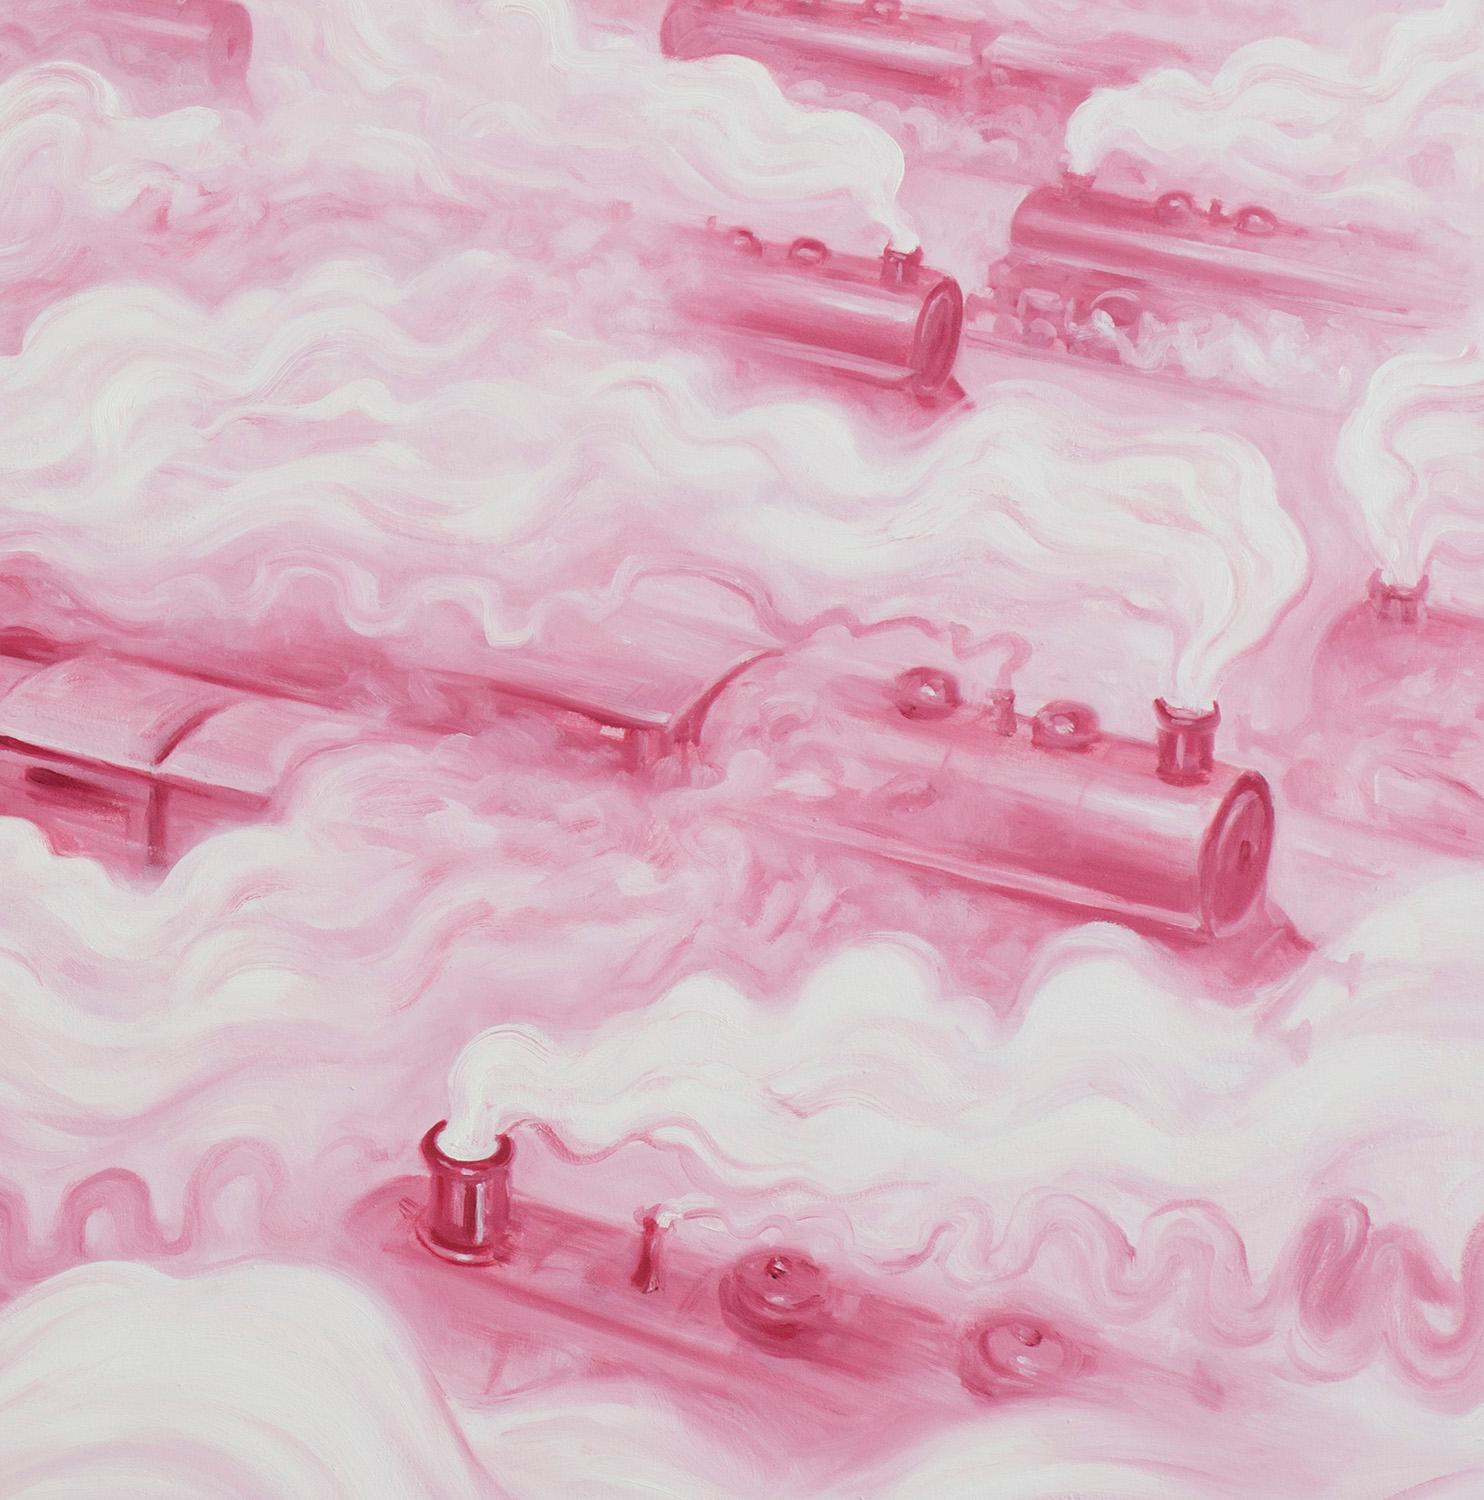 Pink Freud’s Dream (2015) was part of the exhibition 